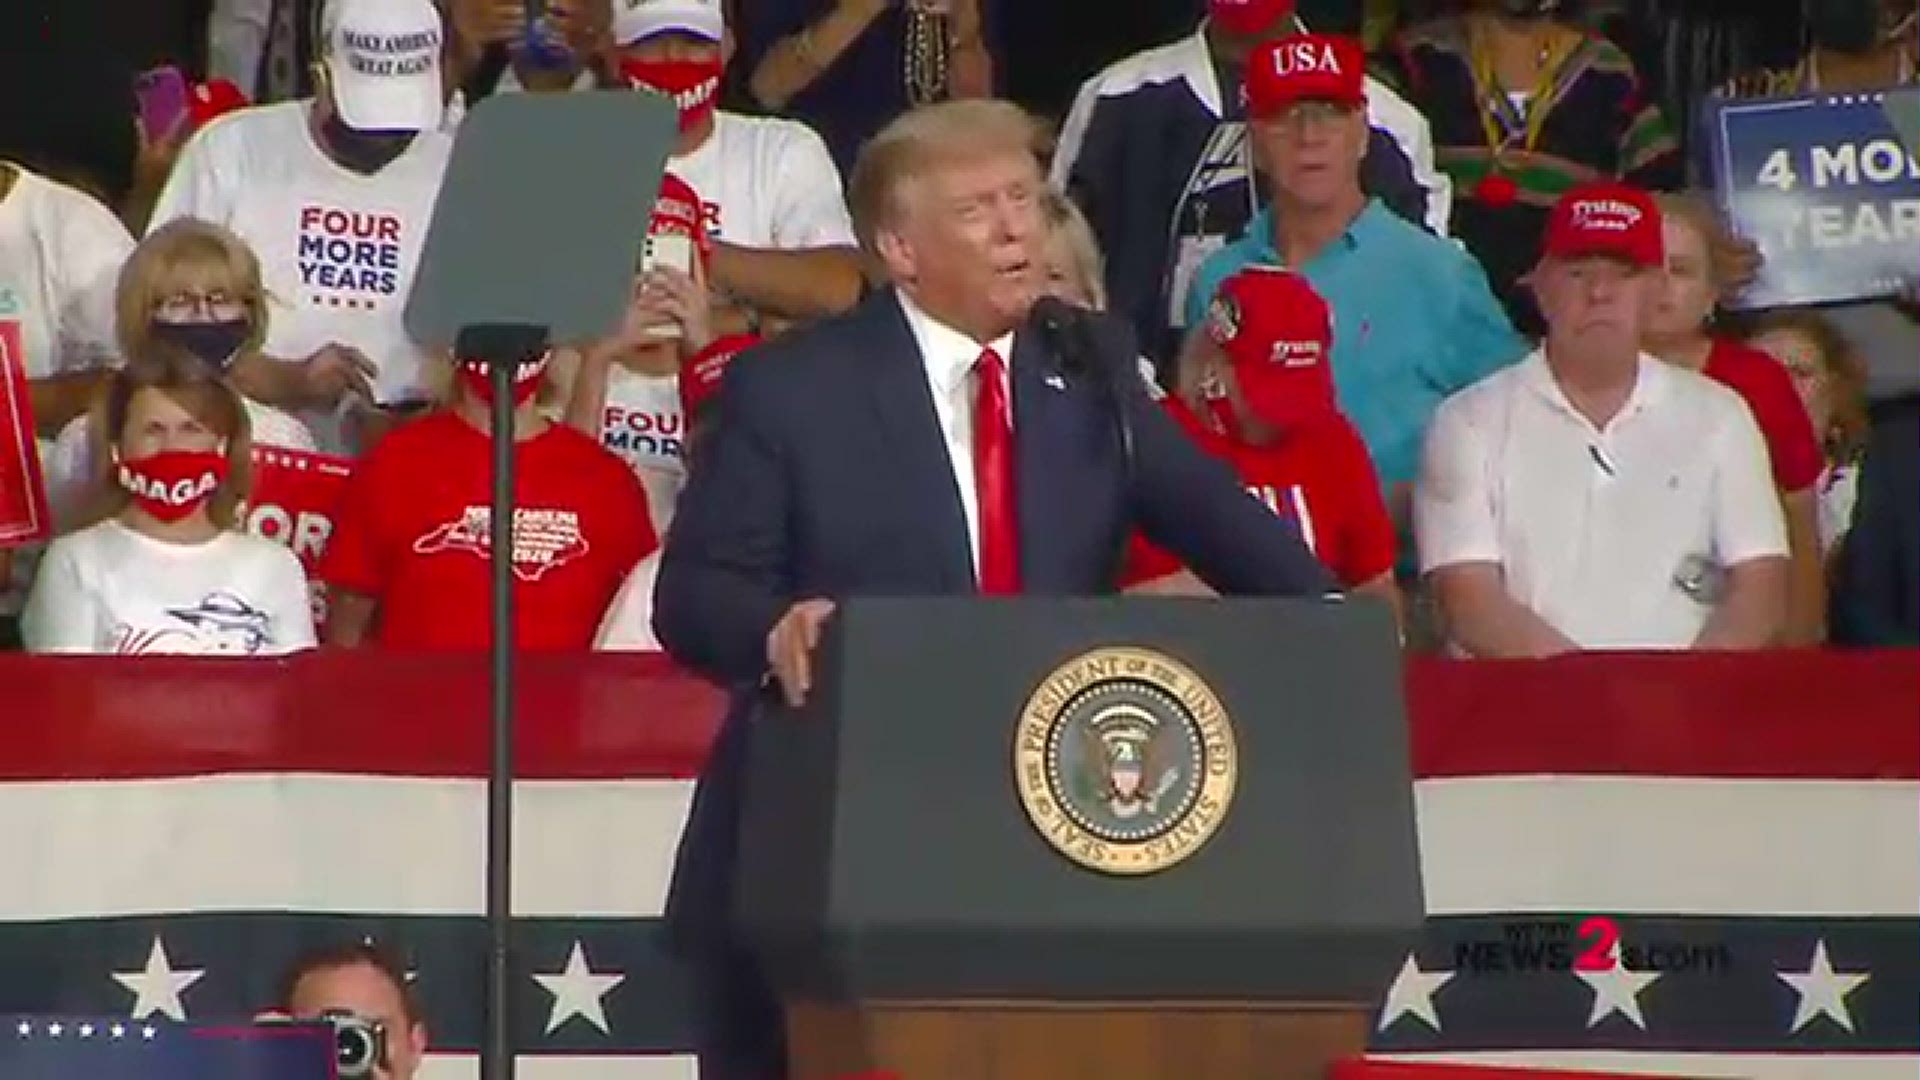 President Trump held a campaign rally in Winston-Salem Tuesday night. It’s the first time President Trump has held a public event in the Triad since taking office.